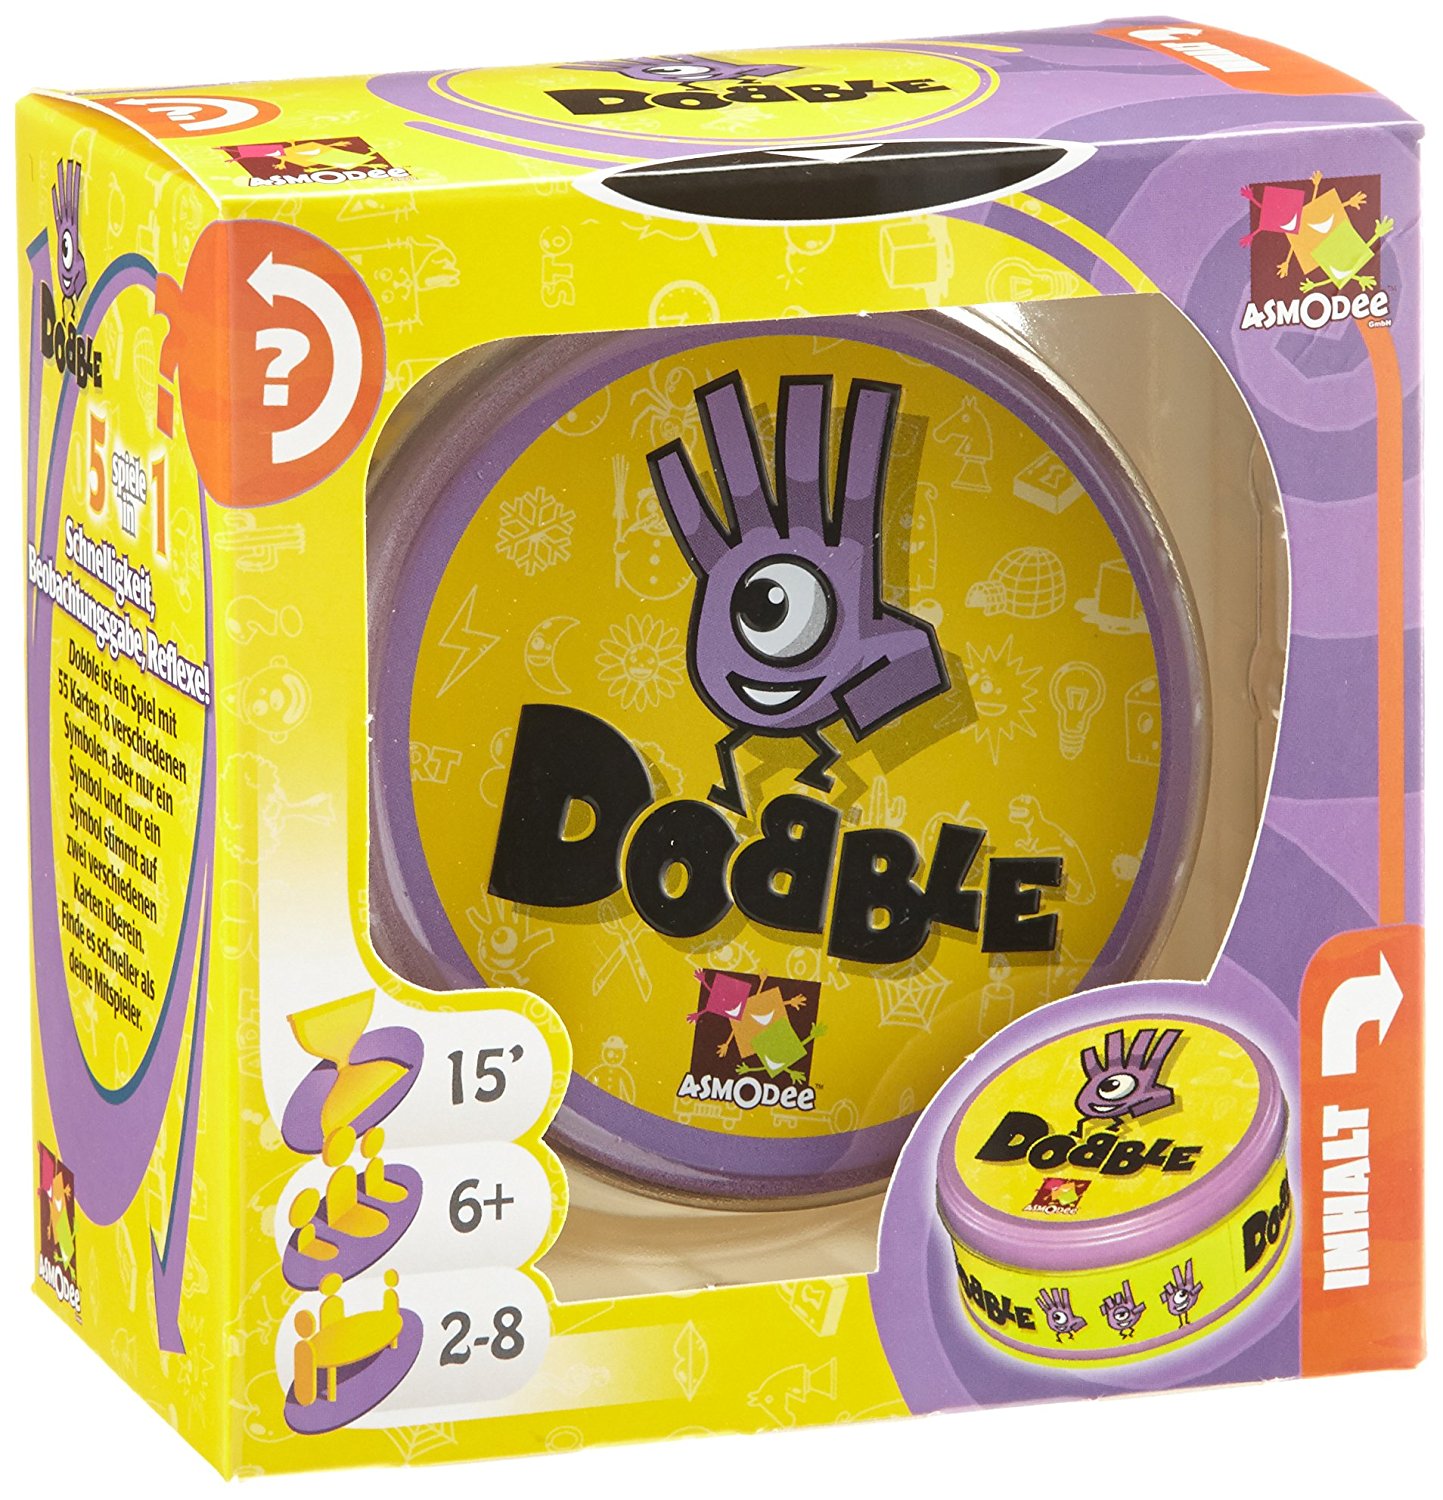 Dobble ⋆ The Mind Games ⋆ Buy it now from our store